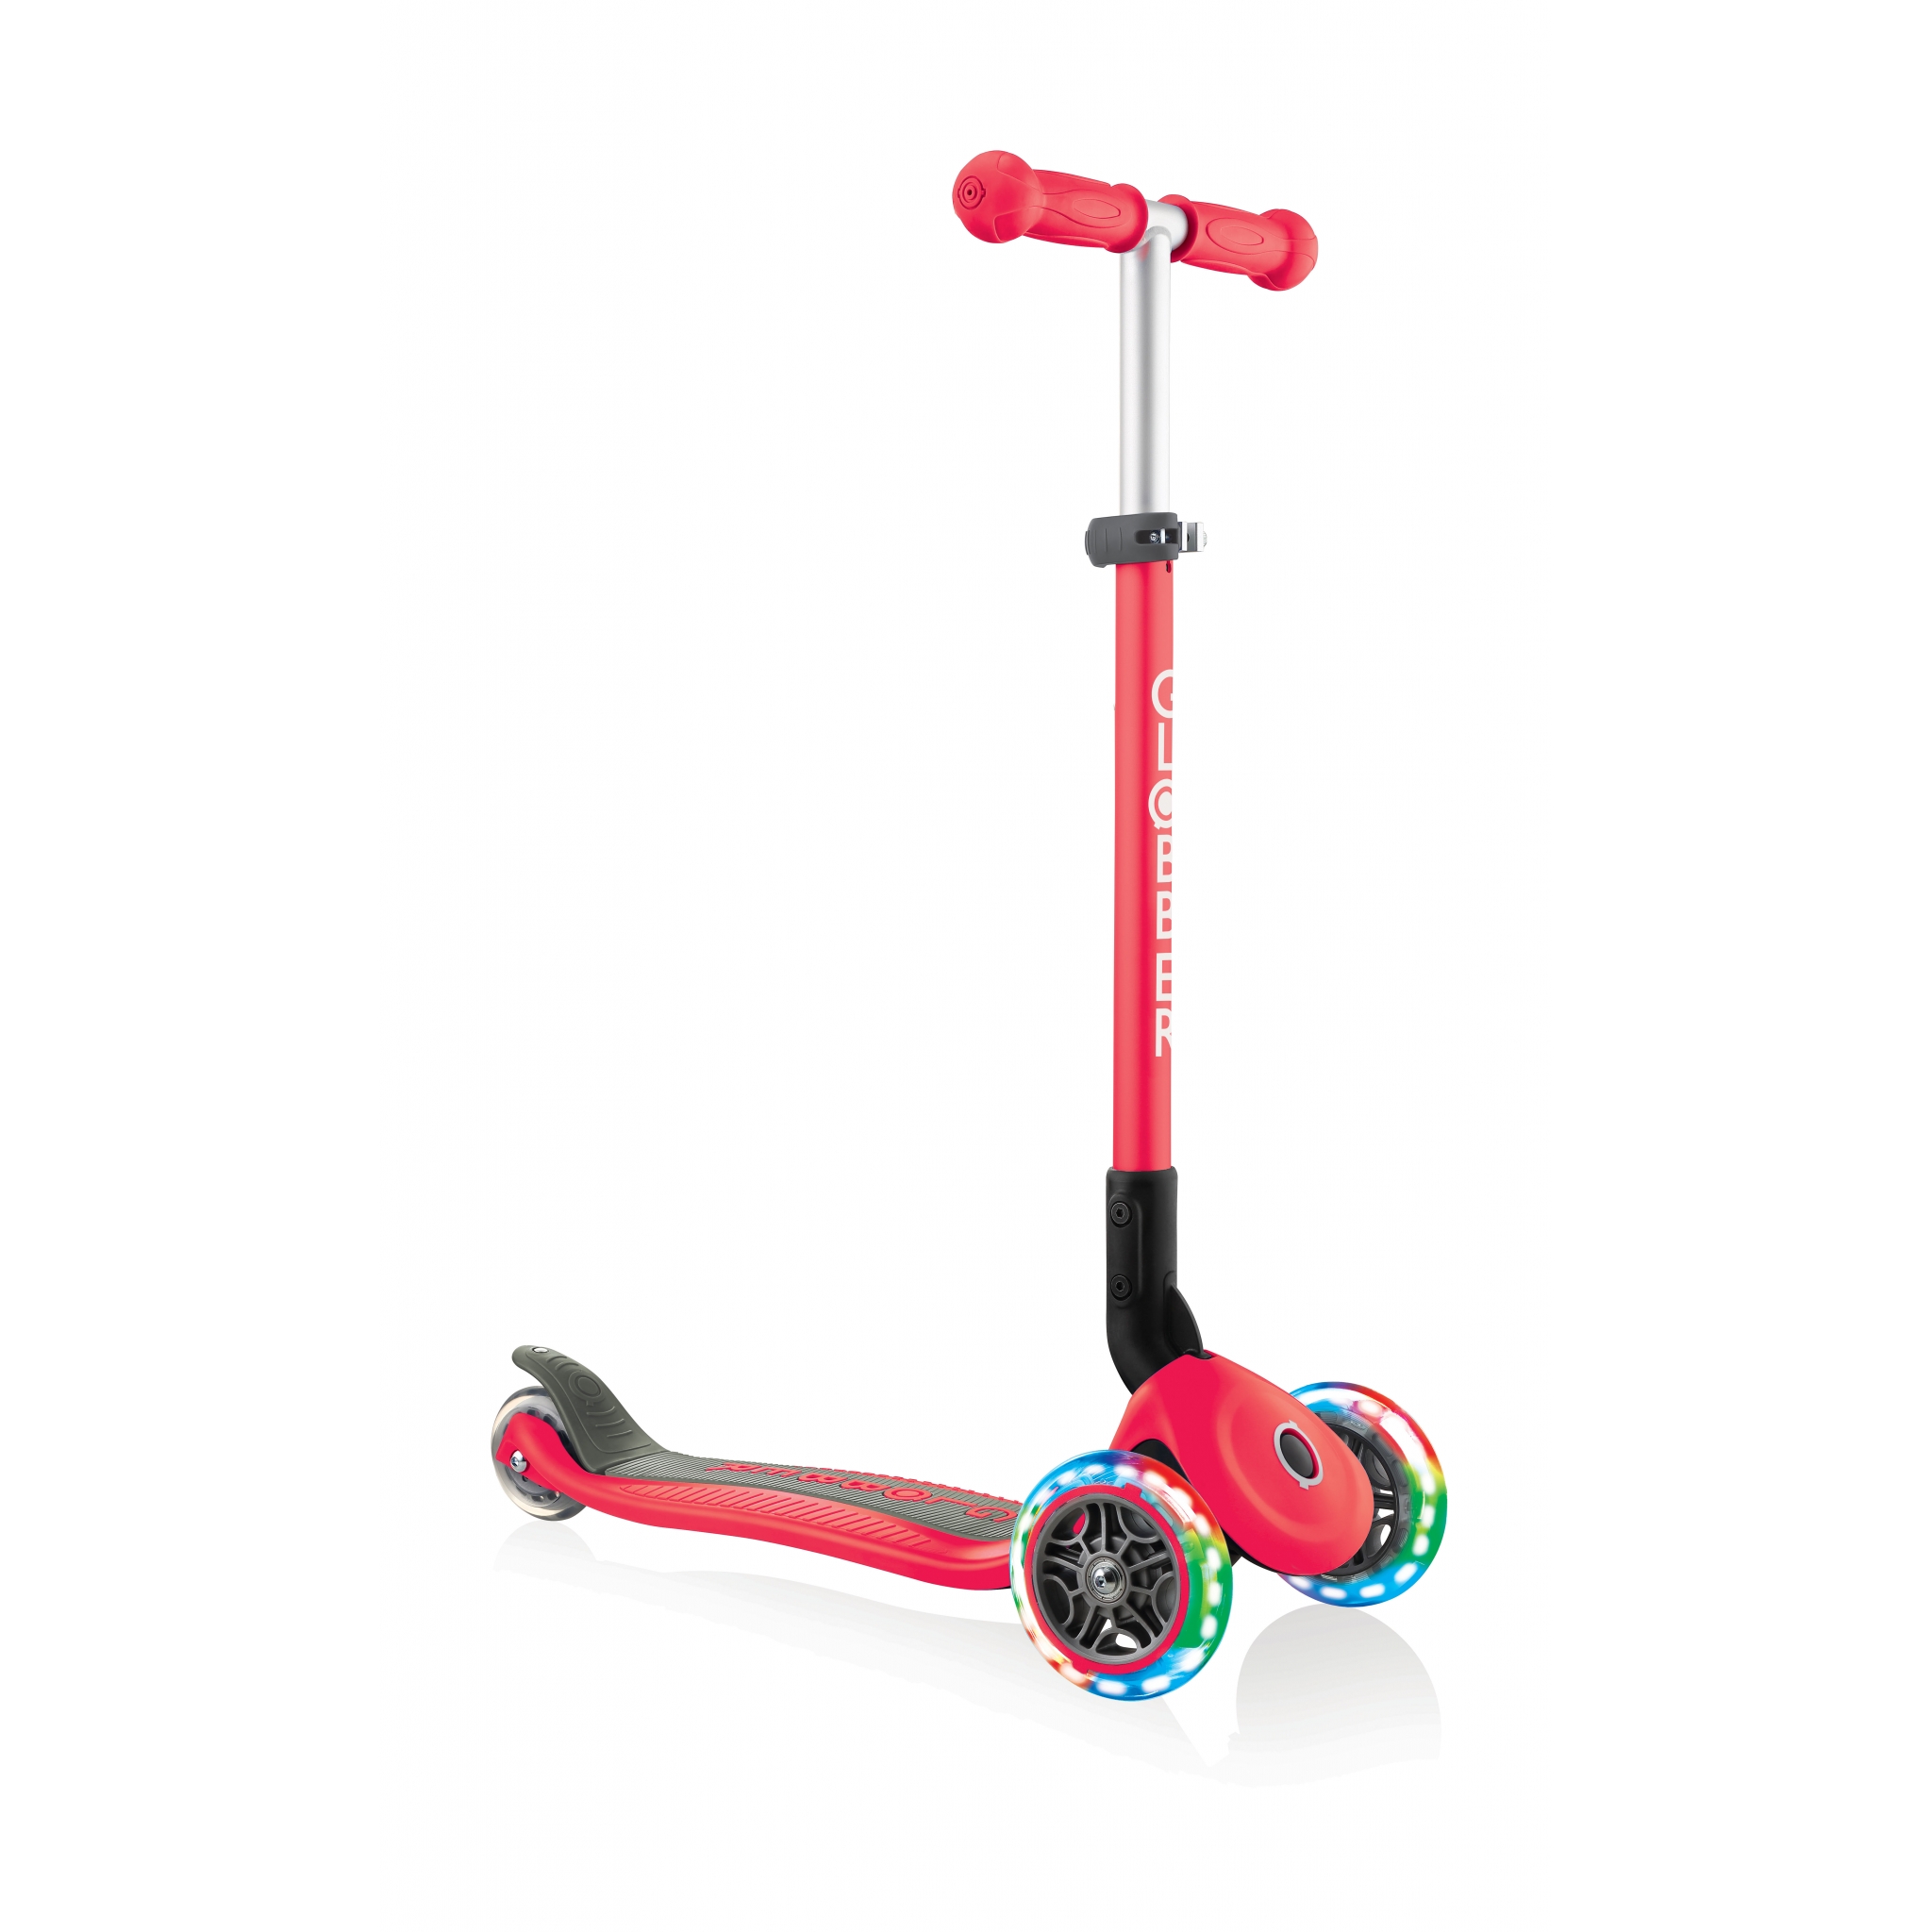 PRIMO-FOLDABLE-LIGHTS-3-wheel-foldable-scooter-light-up-scooter-for-kids-new-red 4